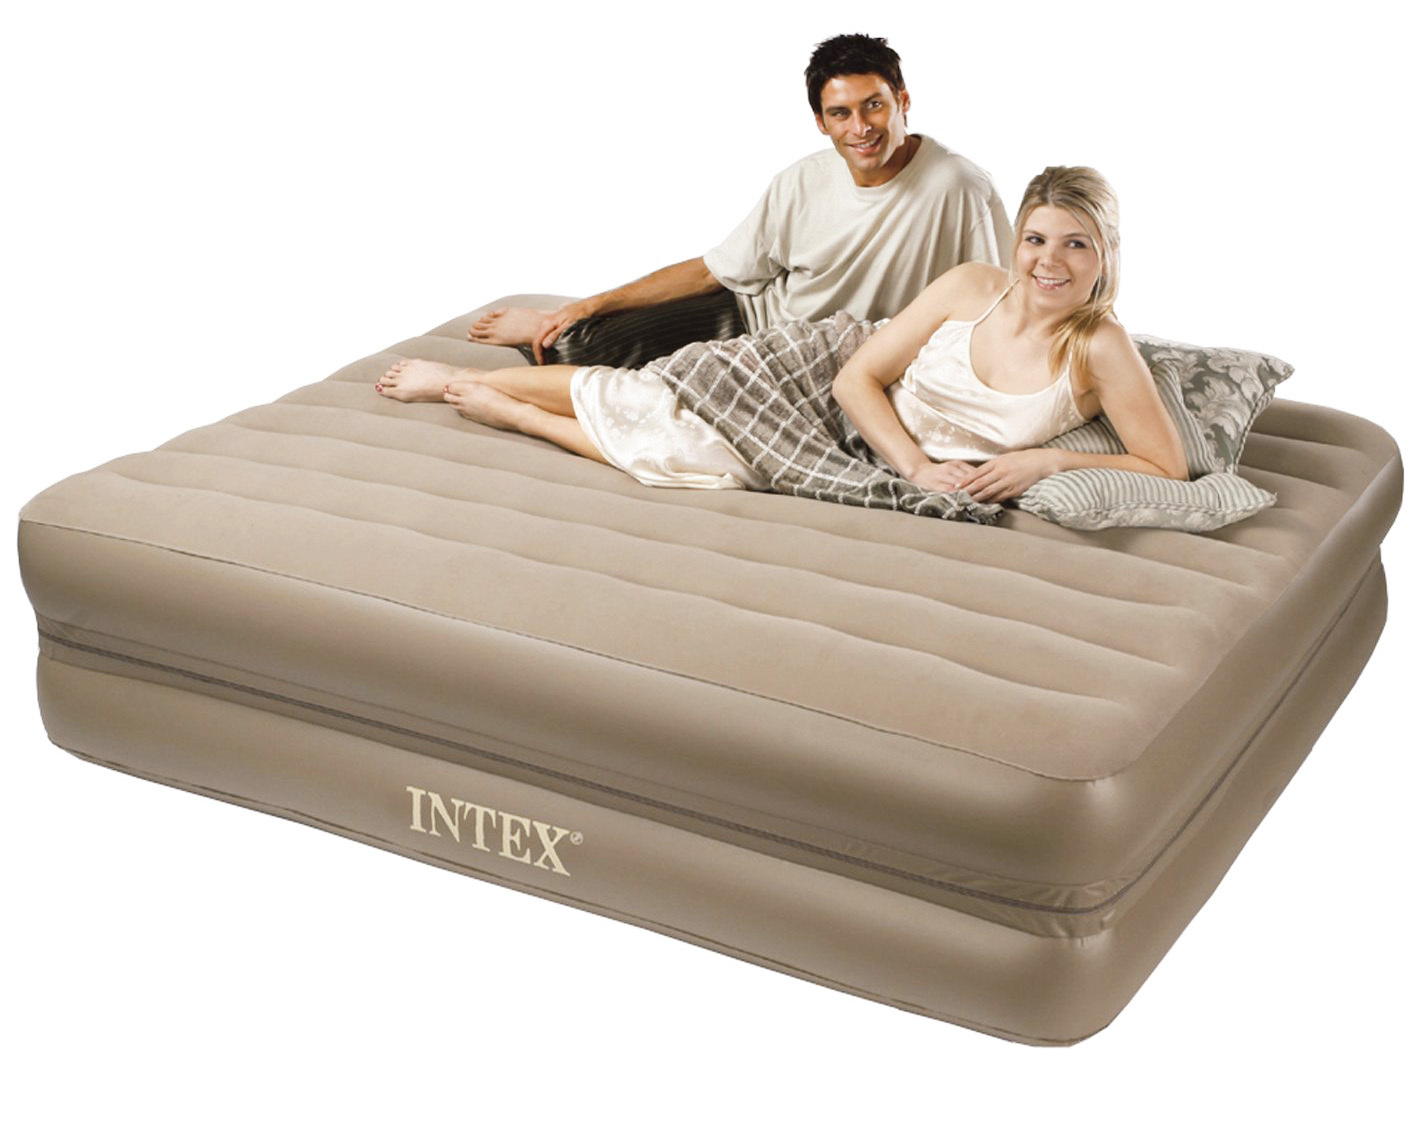 Intex Deluxe Queen Size Comfort Pillow Rest Raised Inflatable Airbed Mattress Air Bed